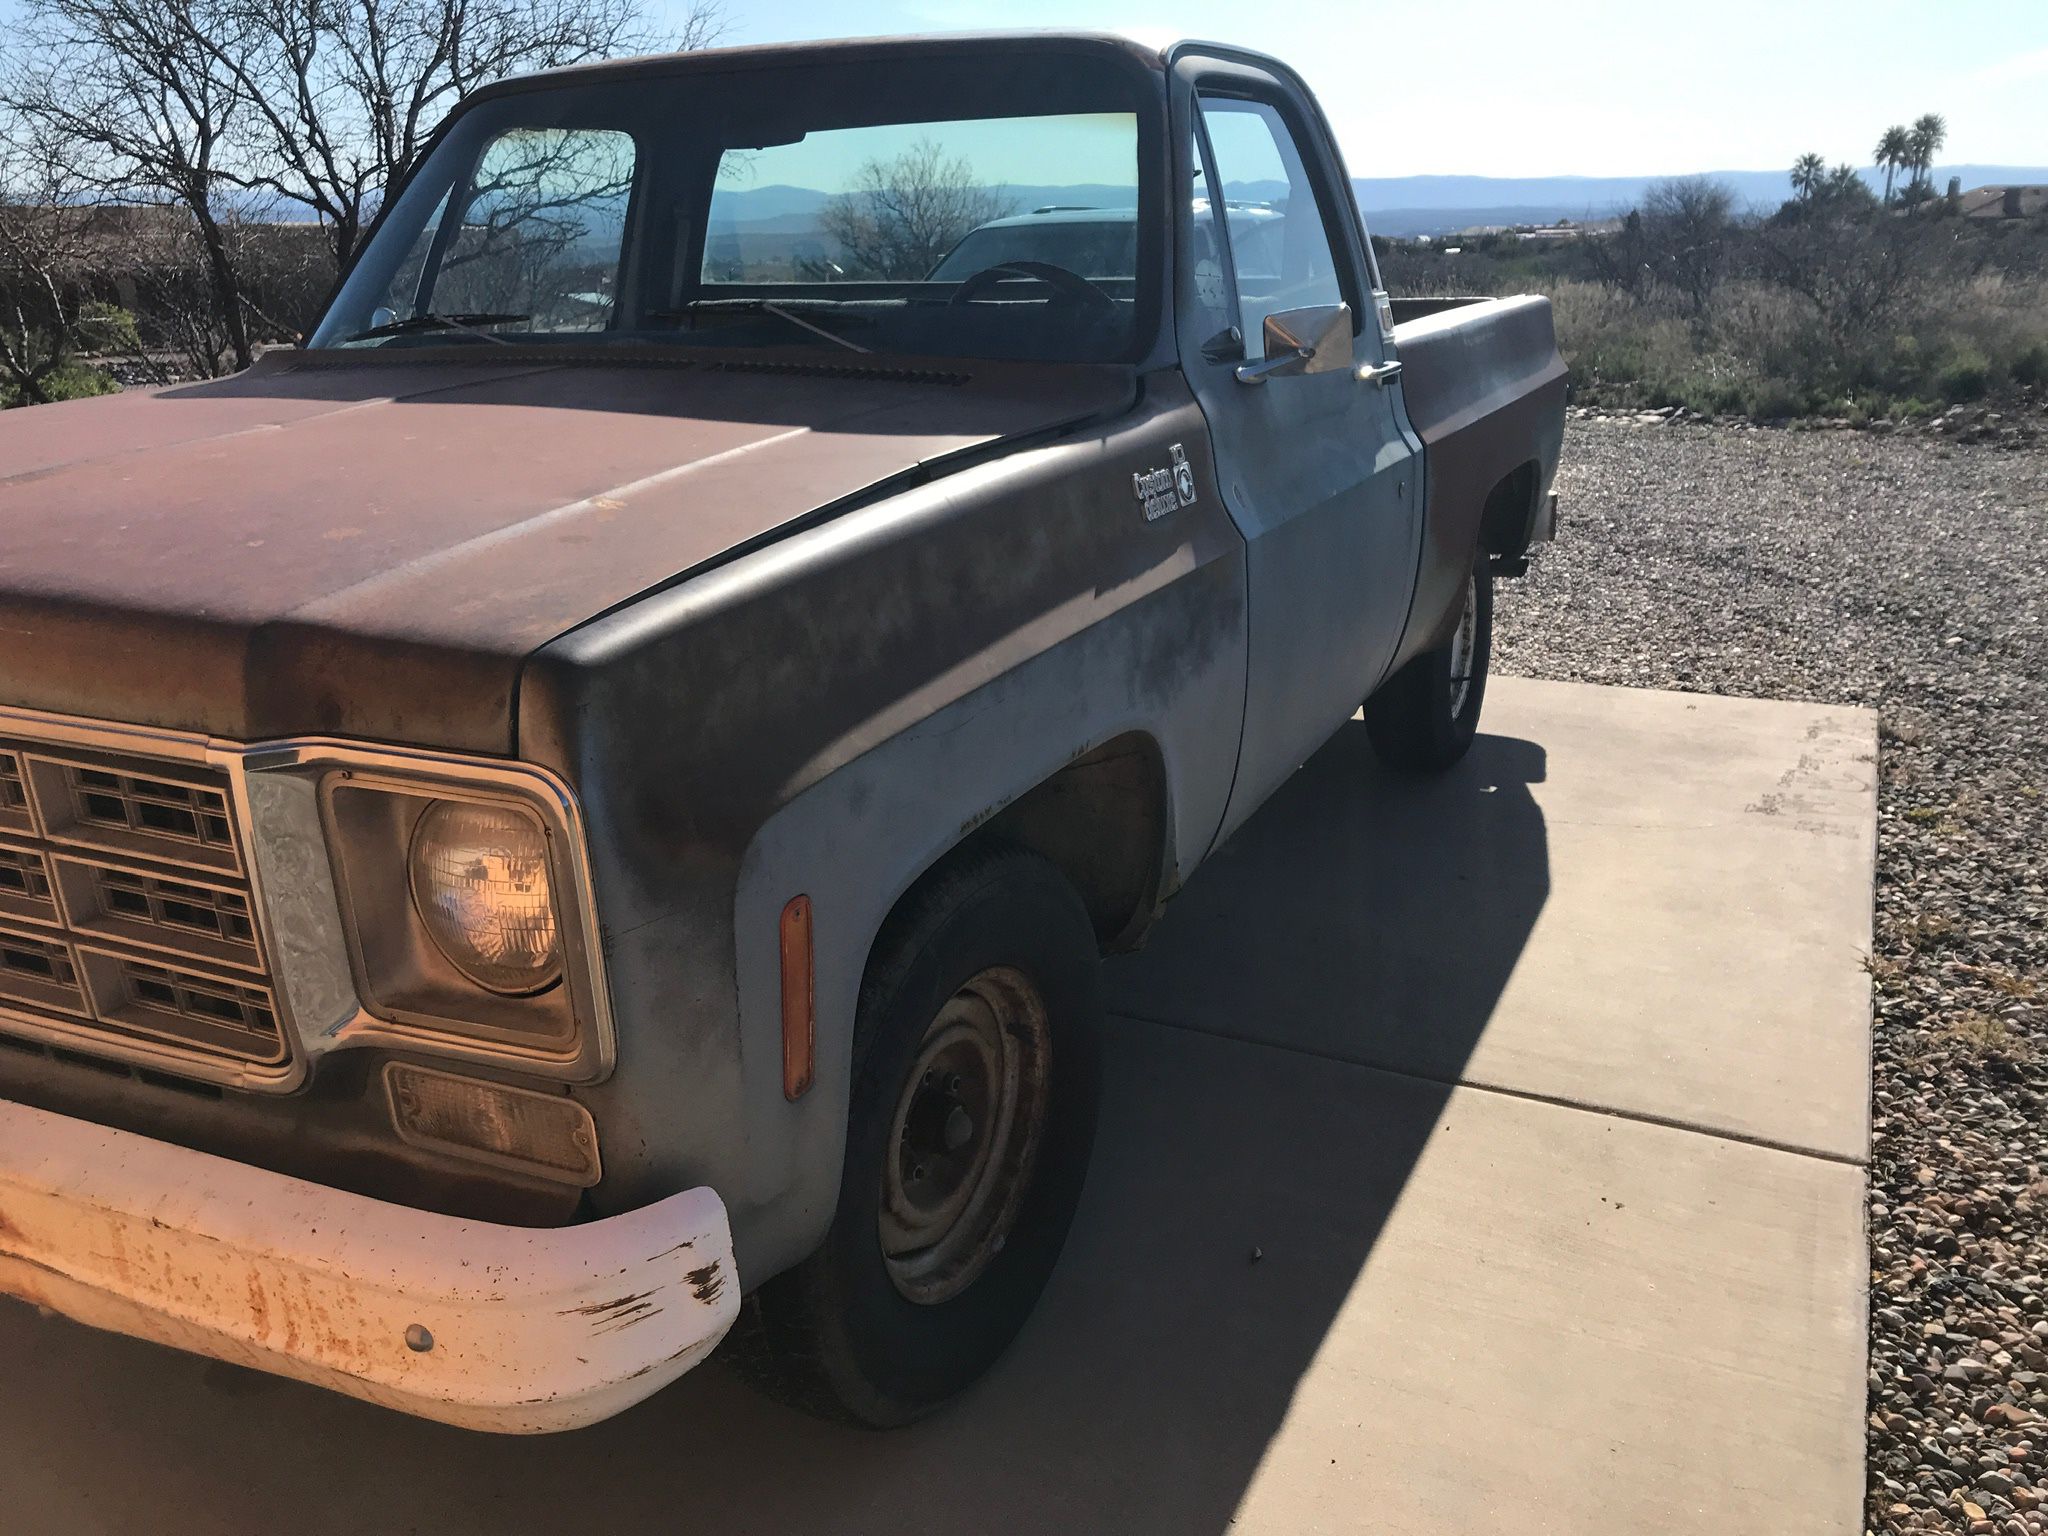 1977 SHORT BED C-10 PICK UP small block 350 5.7 liter engine 3 speed with granny gear good compression